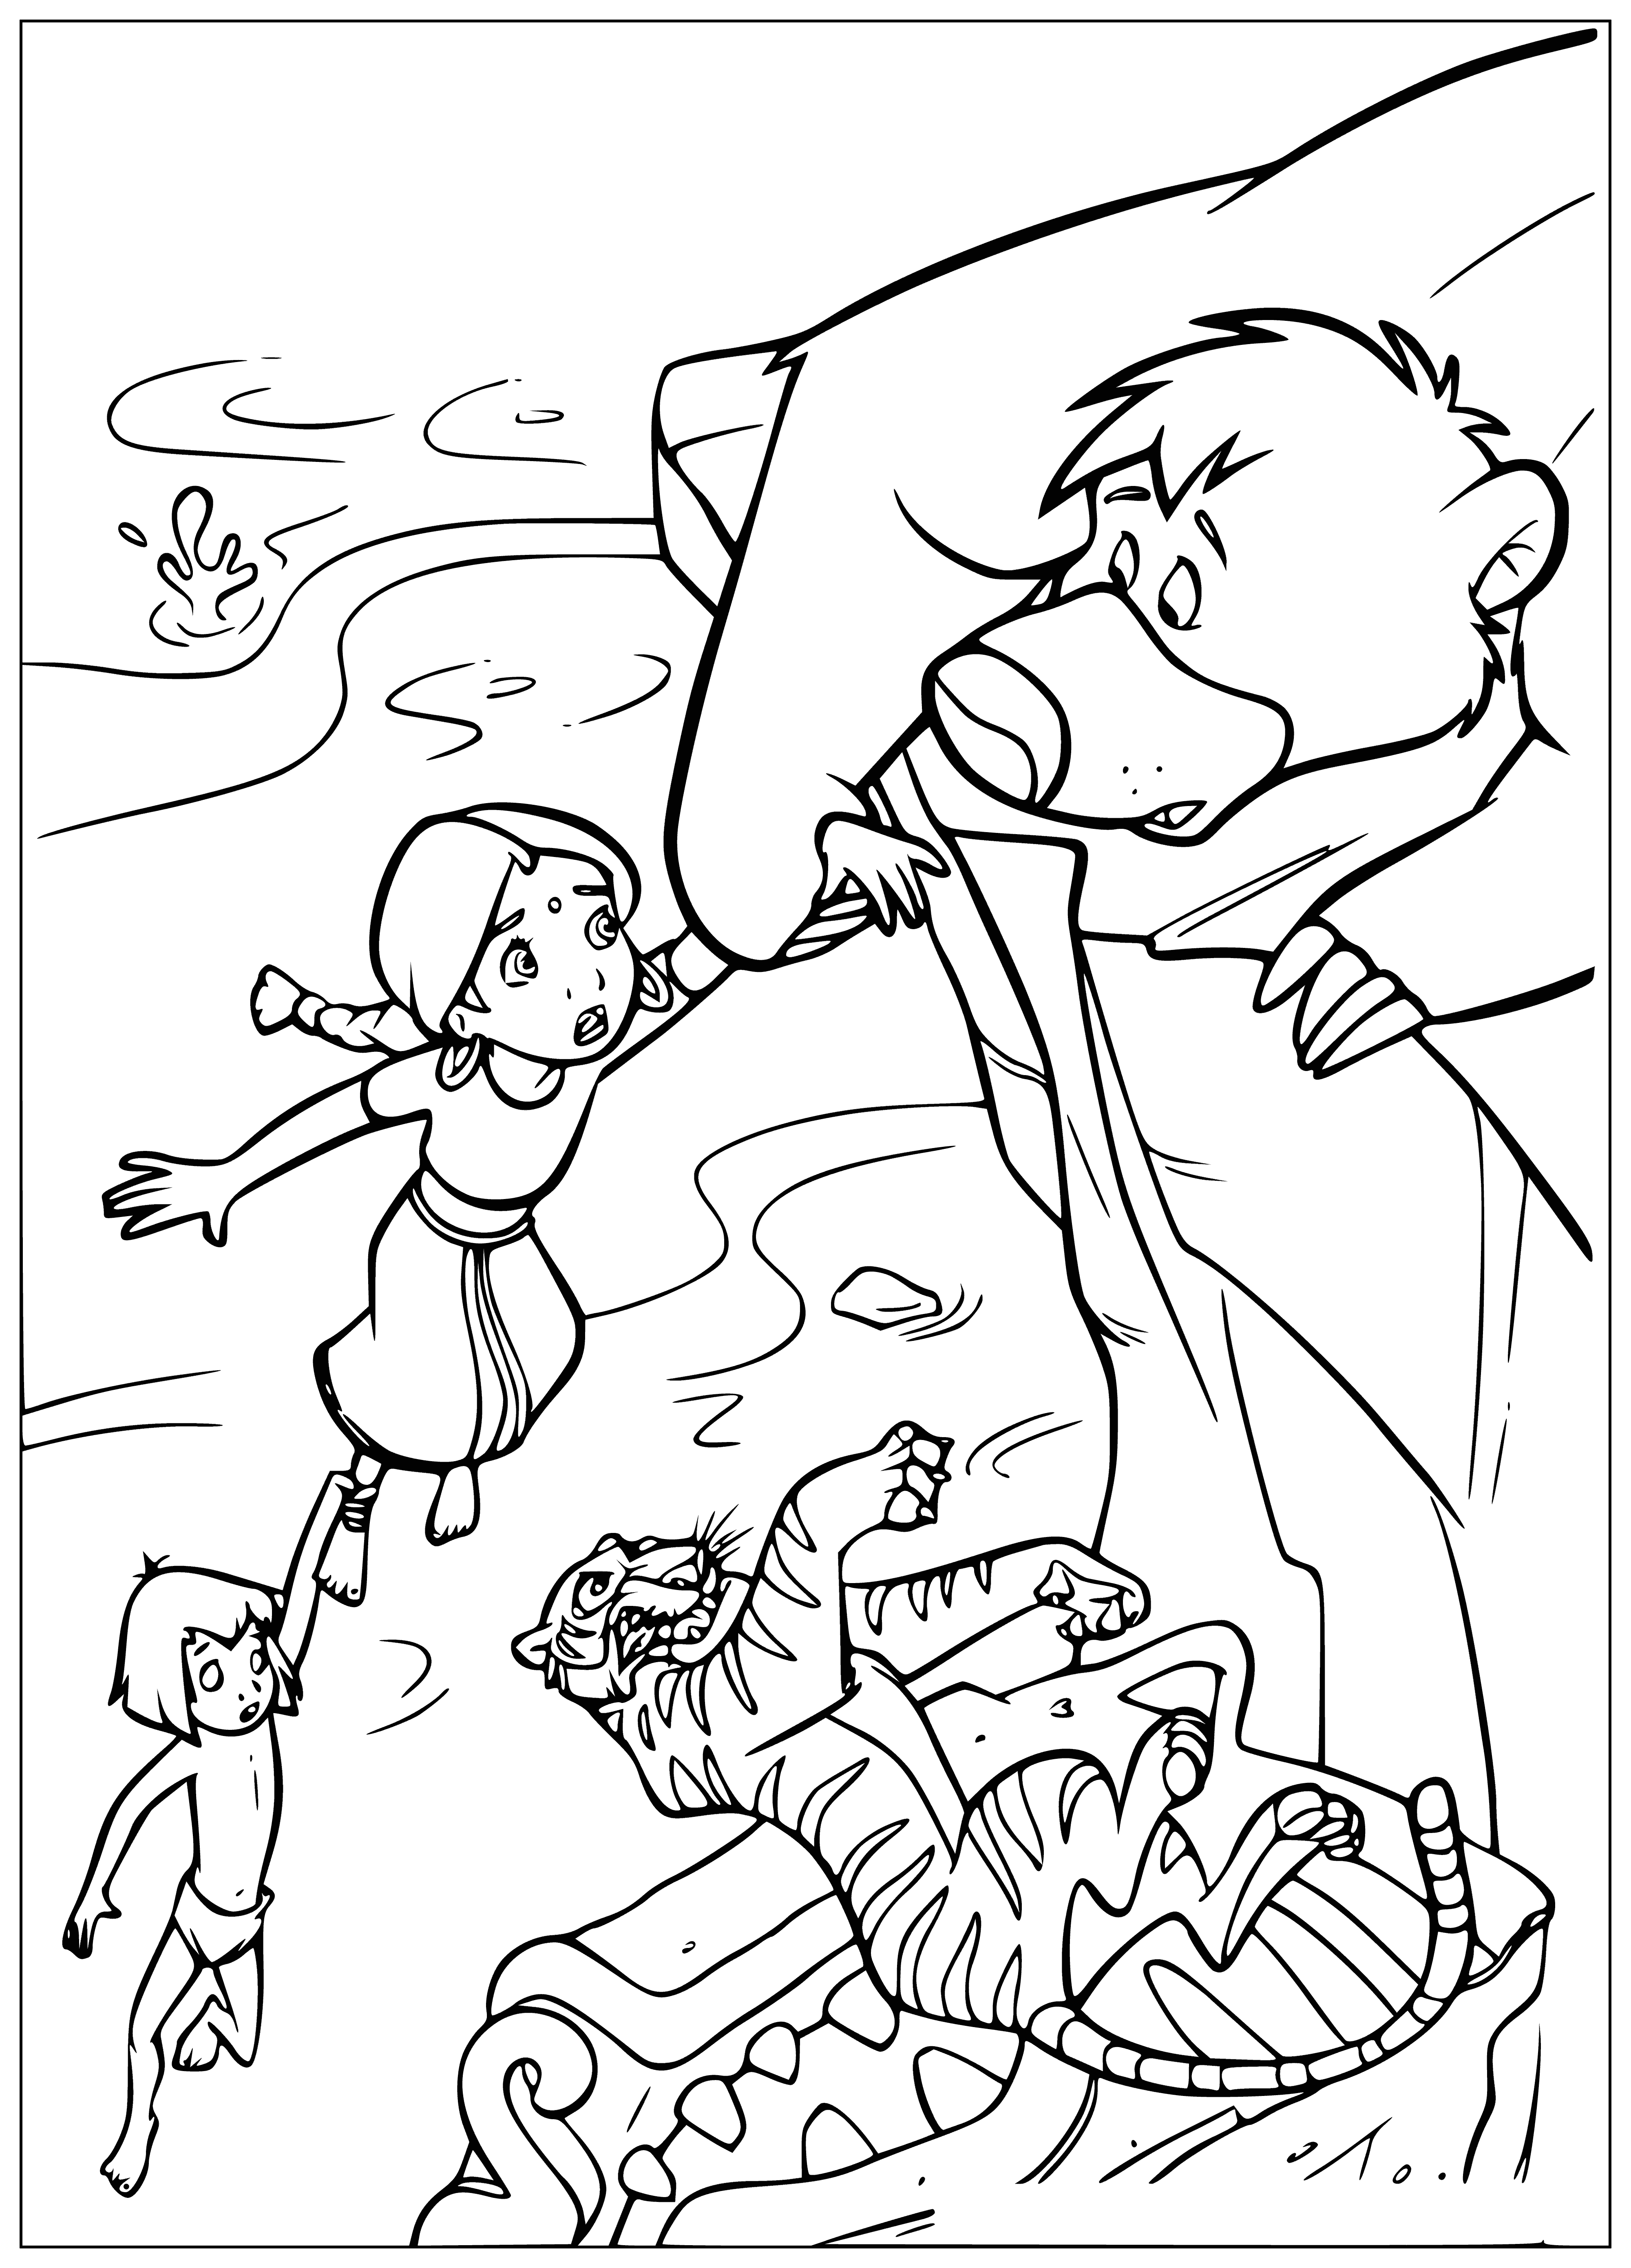 coloring page: Boy climbs tree w/ monkey on his back, swinging from branch is a child's swing. Beside him lies large tiger on its paws. #tigerswing